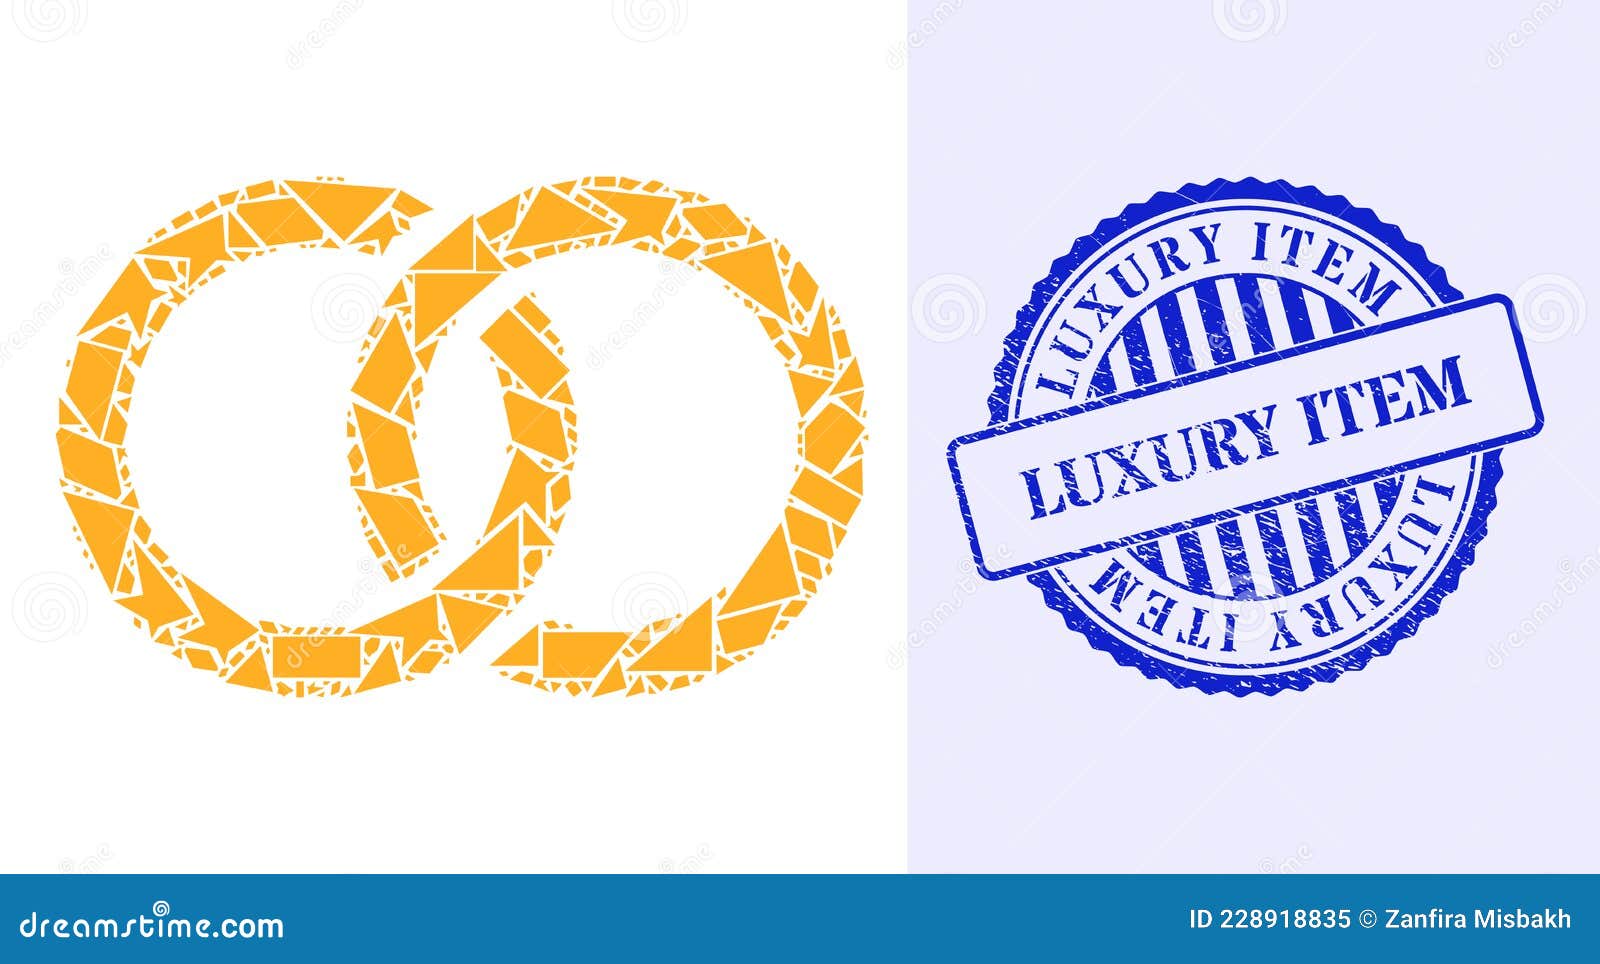 Shatter Mosaic Marriage Rings Icon with Luxury Item Distress Seal Stock  Vector - Illustration of badge, grunge: 228918835